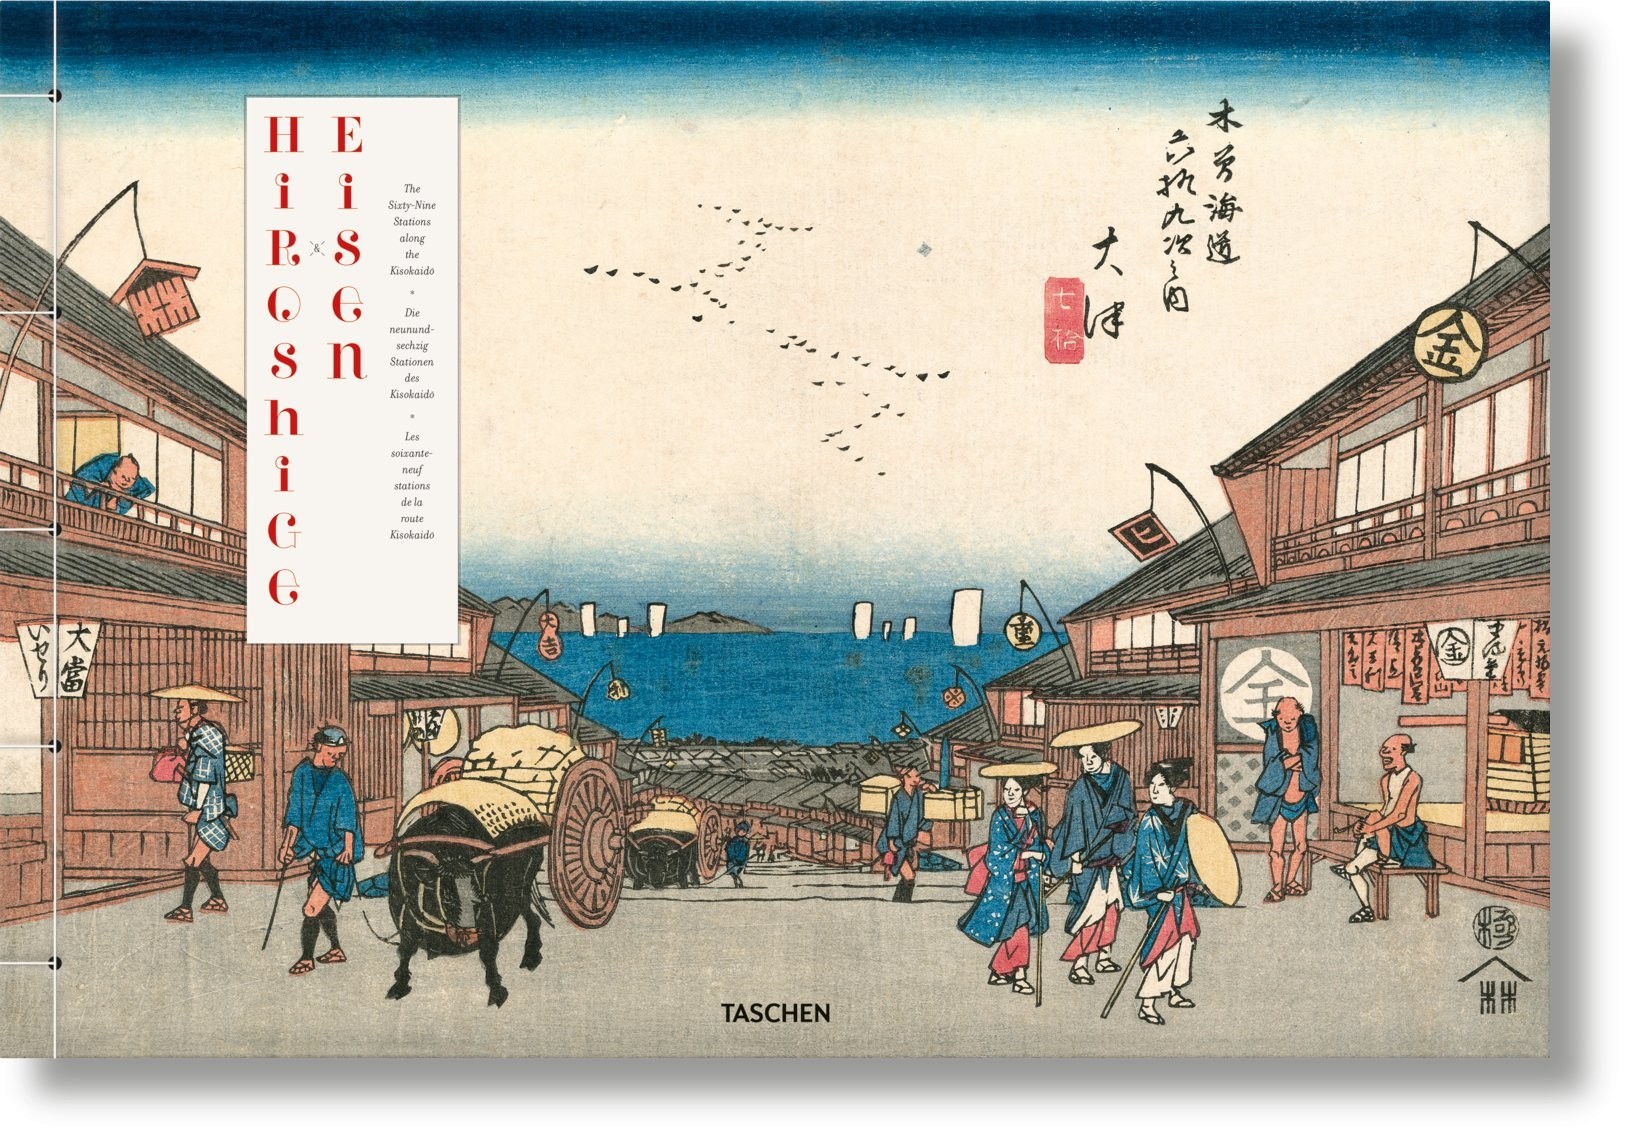 Hiroshige And Elsen The Sixty Nine Stations Along The Kisokaido Book By Andreas Marks (blue / hardcover)